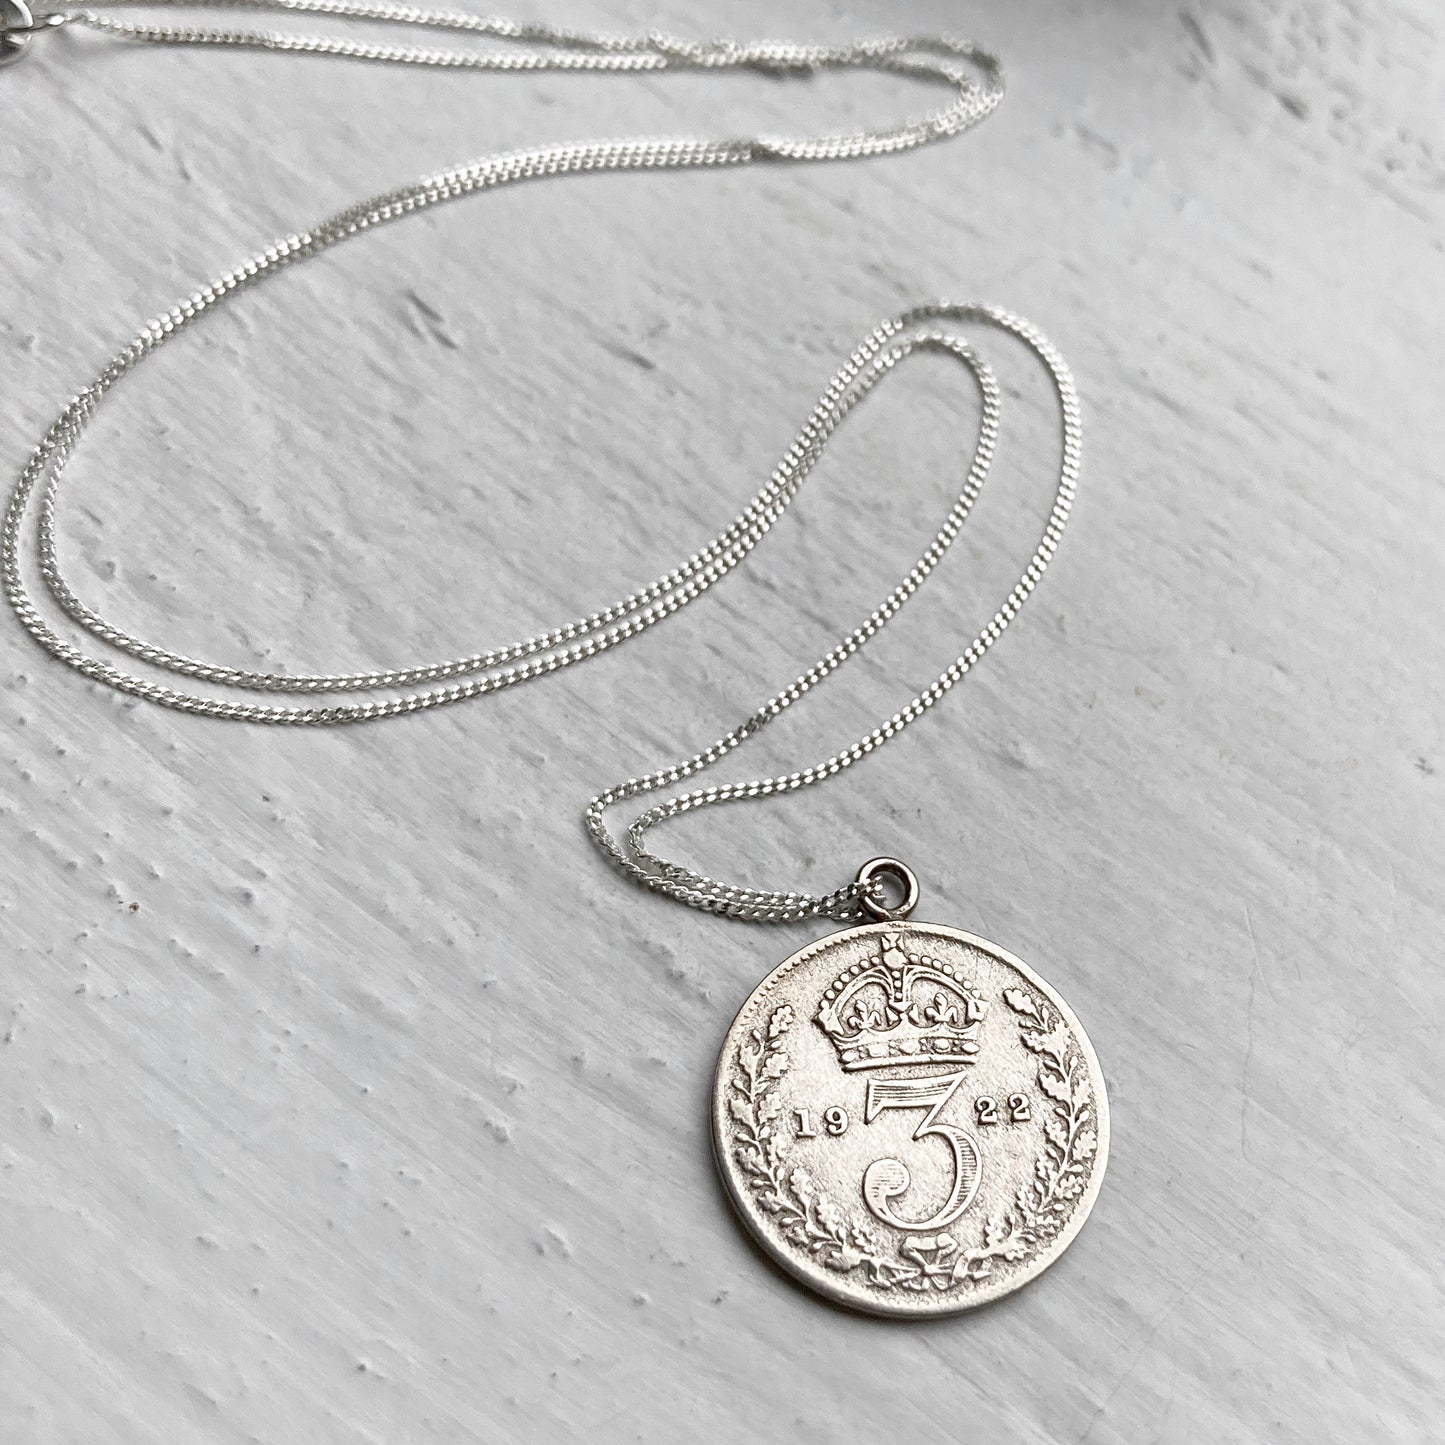 Three Pence Silver Necklace - Crown